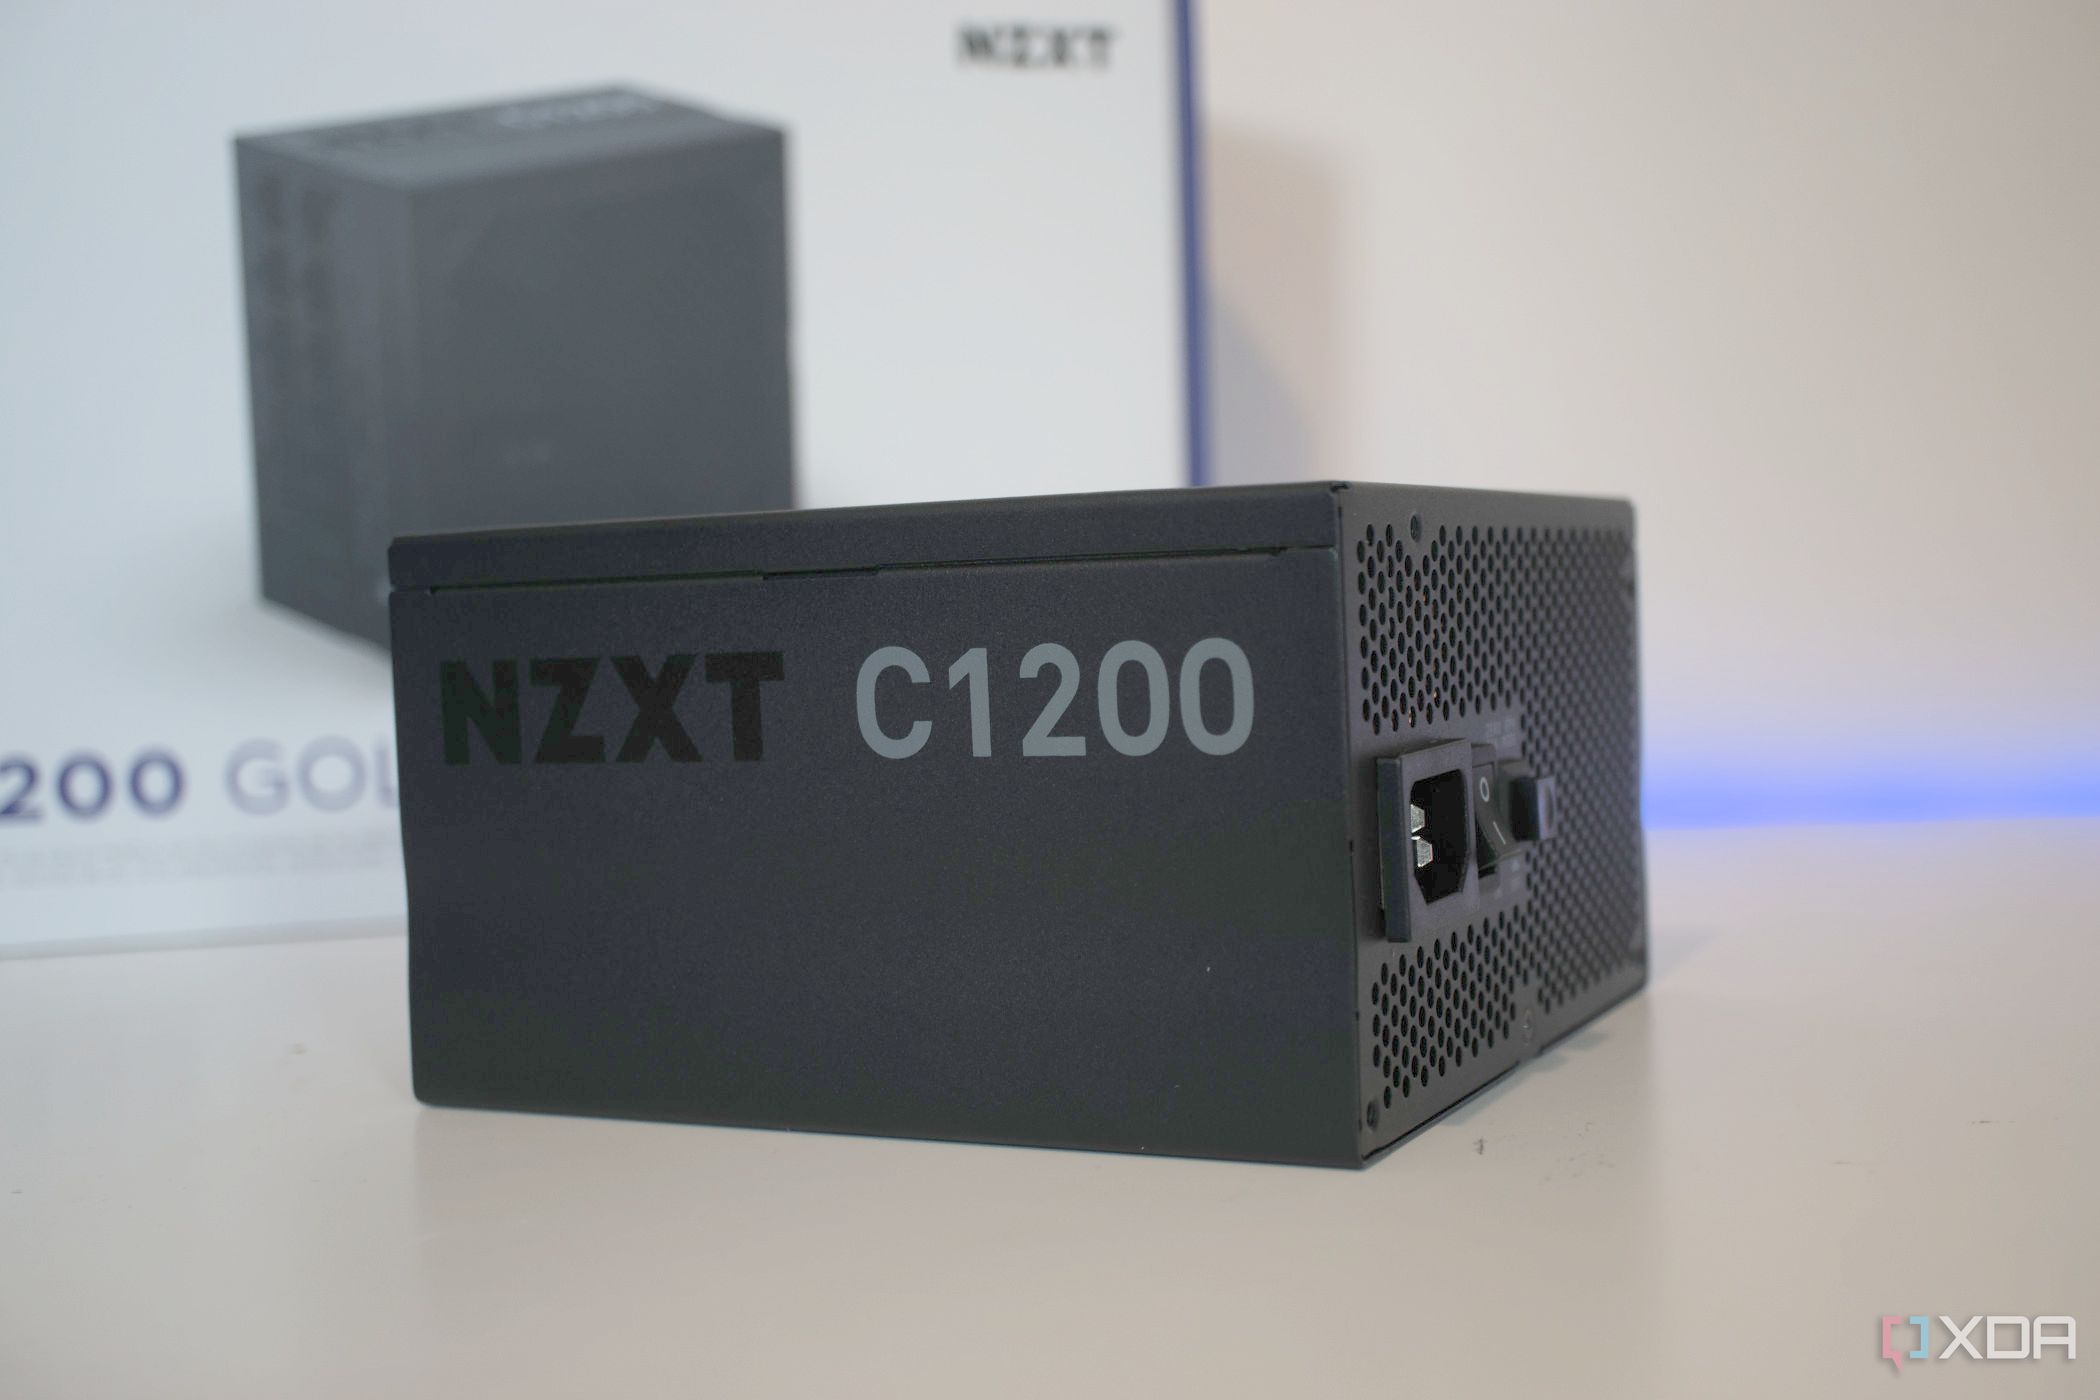 nzxt-c1200-gold-review:-plenty-of-clean,-reliable-power-for-the-latest-gpus